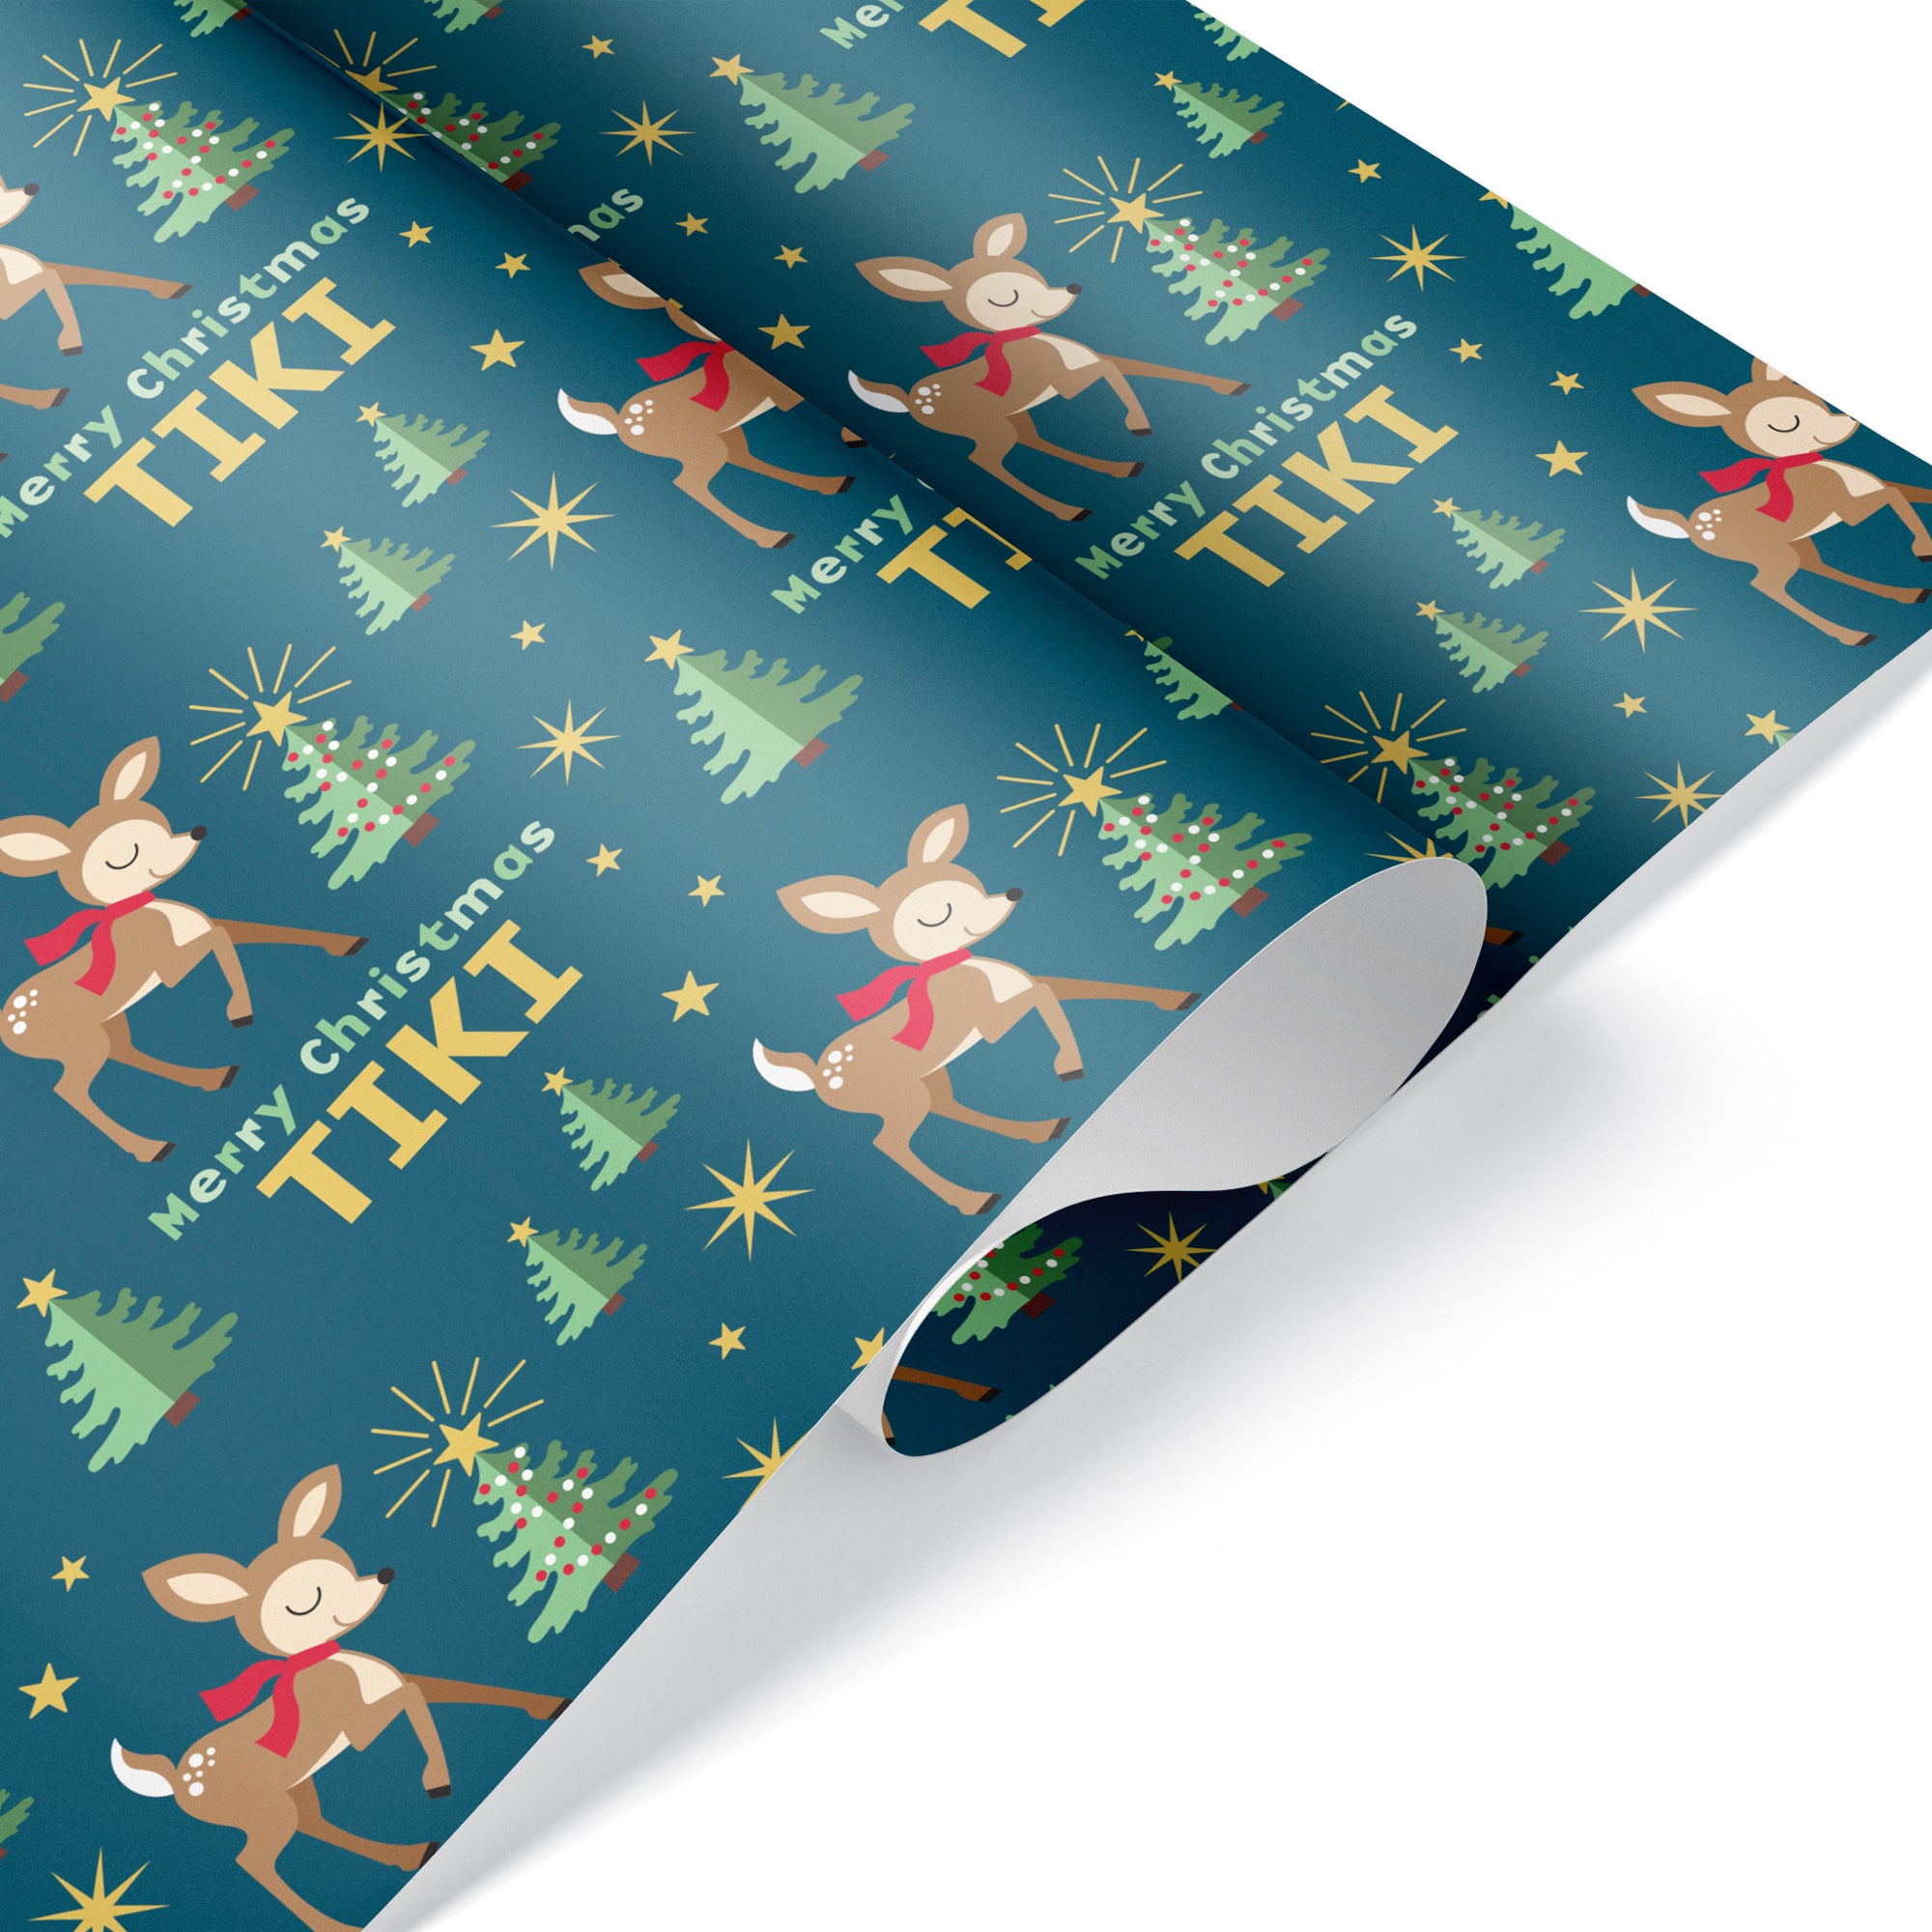 Christmas Name Wrapping Paper - Woodland Animal Deer, Baby, Kids - Graphic  Spaces